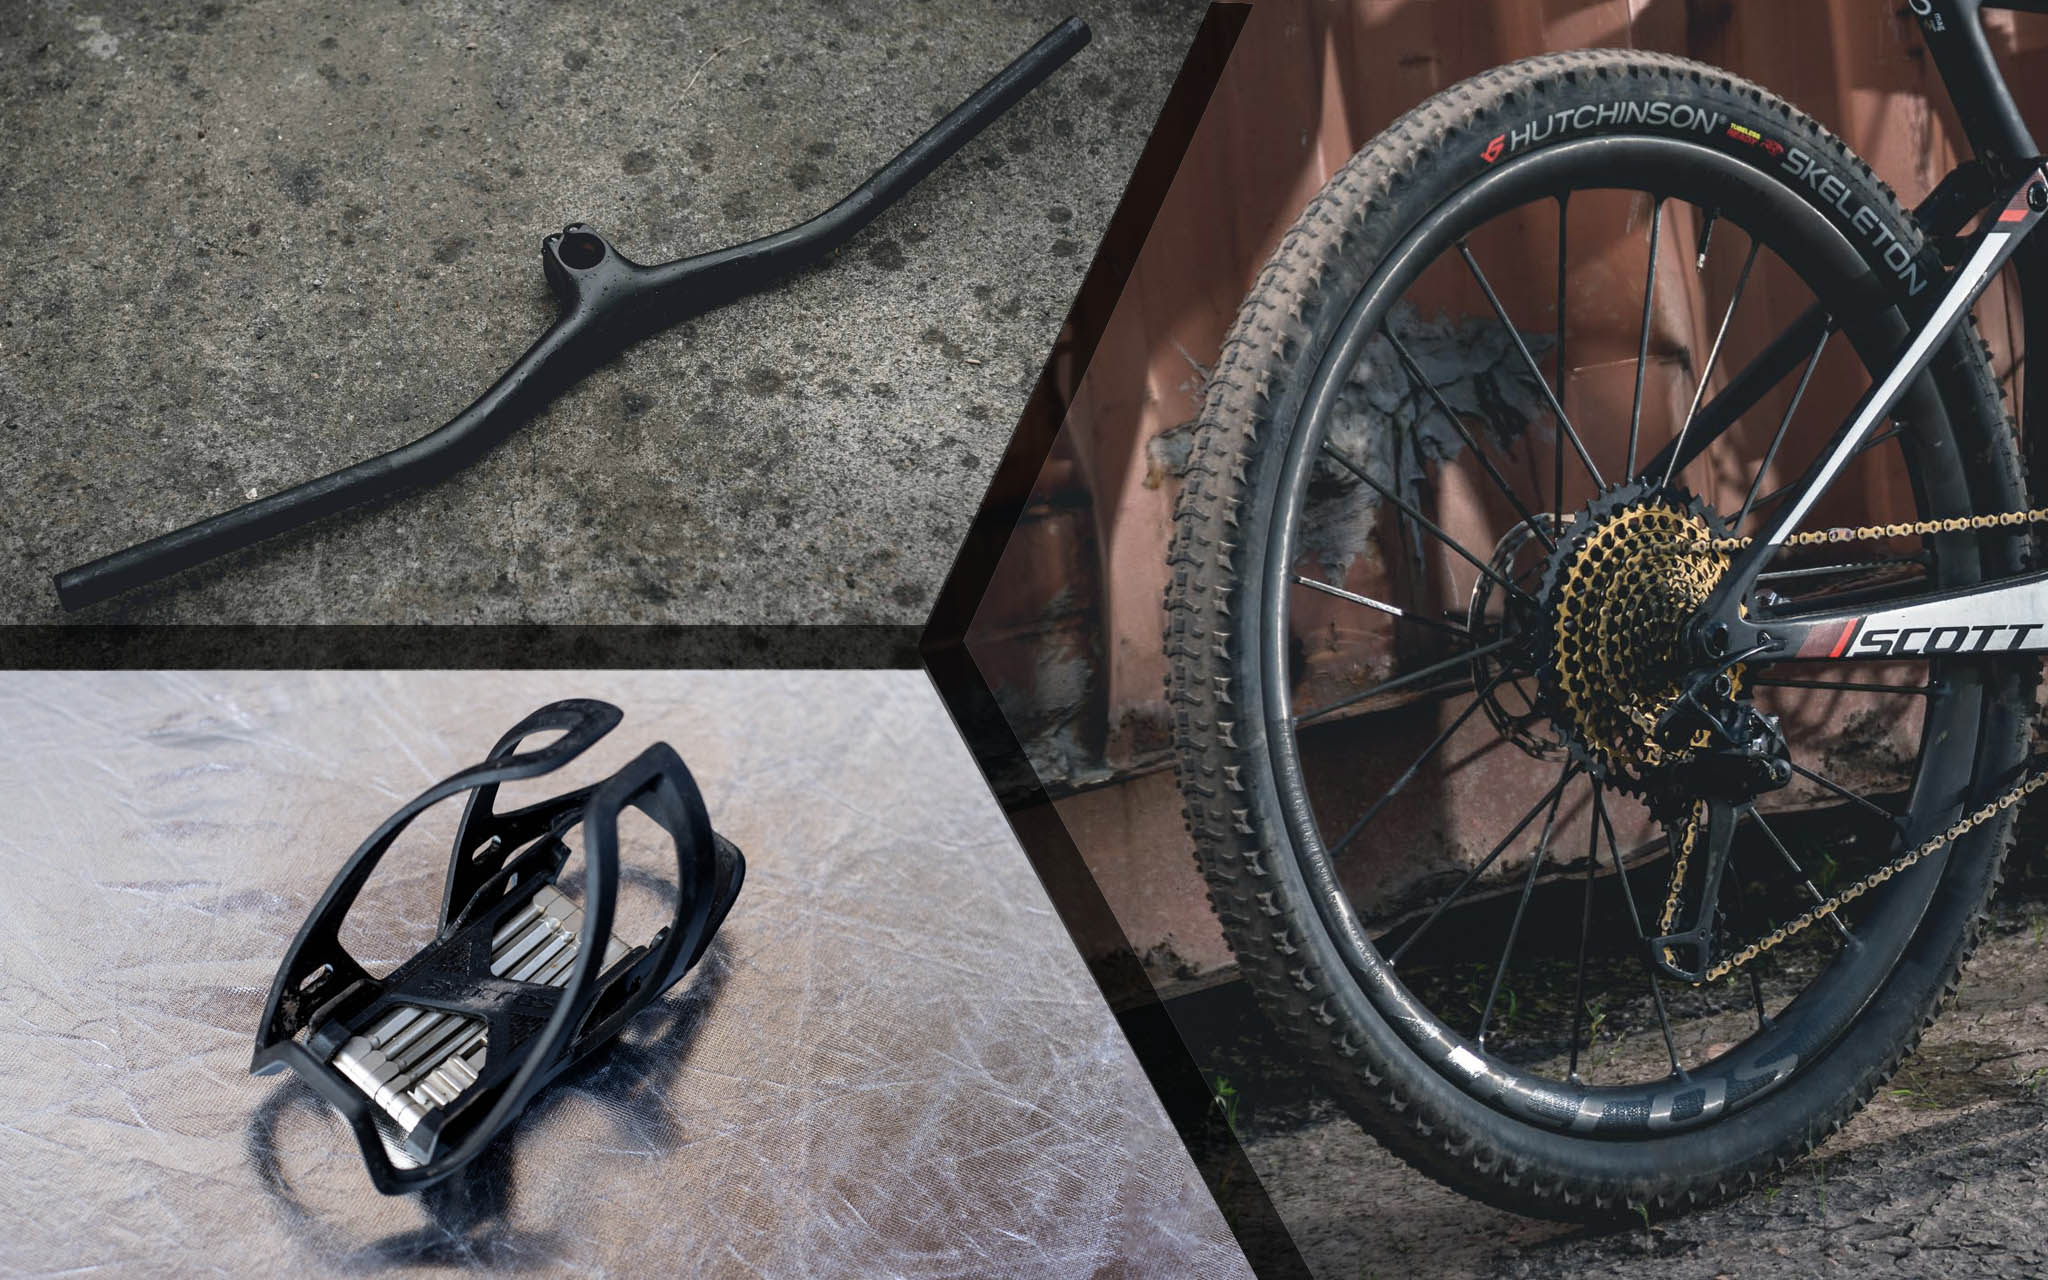 Test ride #15 – Syncros | Roues Silverton SL, cintre Fraser iC SL & Tailor IS Cage